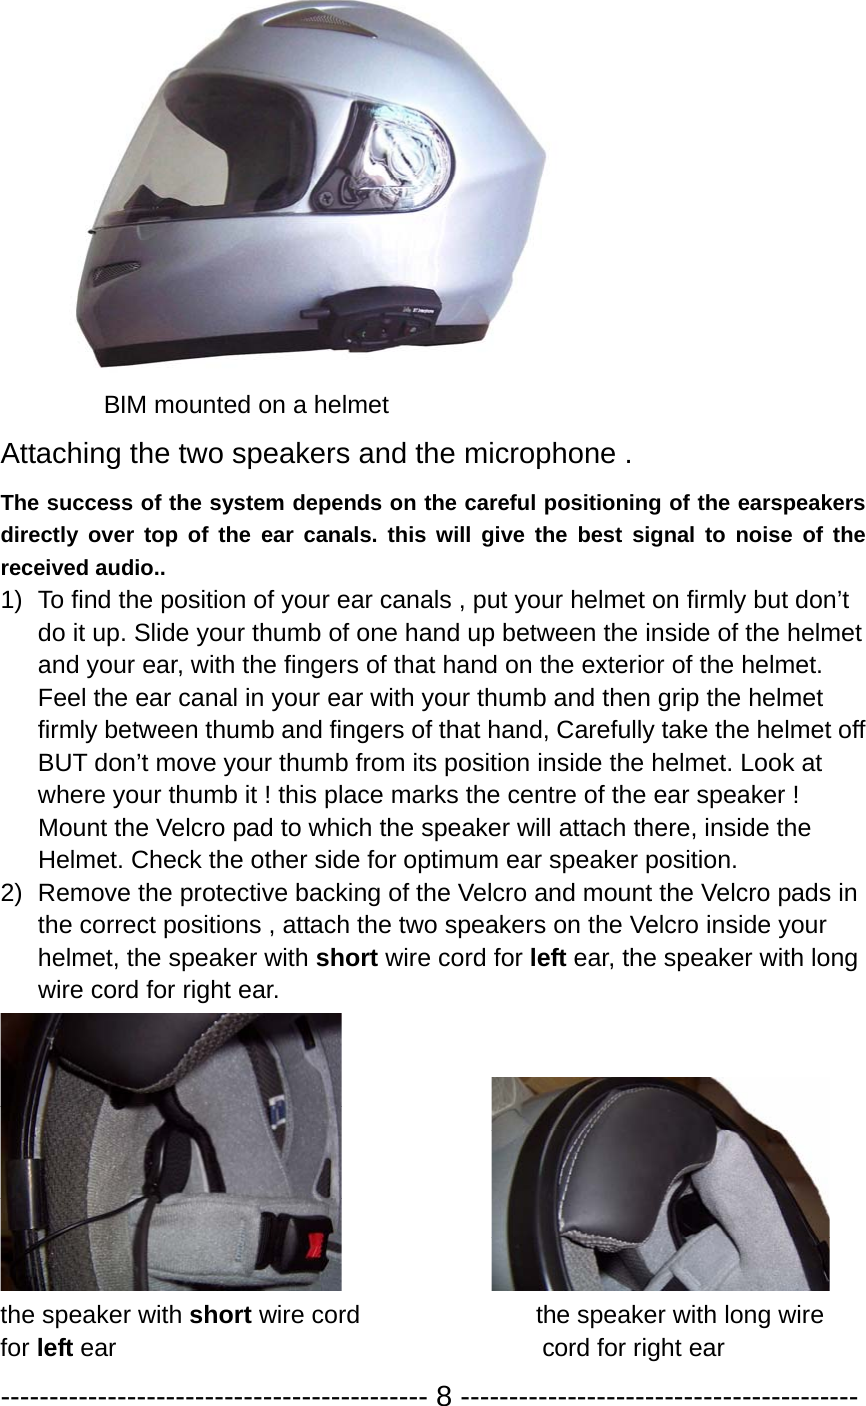           BIM mounted on a helmet Attaching the two speakers and the microphone . The success of the system depends on the careful positioning of the earspeakers directly over top of the ear canals. this will give the best signal to noise of the received audio.. 1)  To find the position of your ear canals , put your helmet on firmly but don’t do it up. Slide your thumb of one hand up between the inside of the helmet and your ear, with the fingers of that hand on the exterior of the helmet. Feel the ear canal in your ear with your thumb and then grip the helmet firmly between thumb and fingers of that hand, Carefully take the helmet off BUT don’t move your thumb from its position inside the helmet. Look at where your thumb it ! this place marks the centre of the ear speaker !   Mount the Velcro pad to which the speaker will attach there, inside the   Helmet. Check the other side for optimum ear speaker position.   2)  Remove the protective backing of the Velcro and mount the Velcro pads in the correct positions , attach the two speakers on the Velcro inside your helmet, the speaker with short wire cord for left ear, the speaker with long wire cord for right ear.               the speaker with short wire cord              the speaker with long wire  for left ear                                  cord for right ear  -------------------------------------------- 8 ----------------------------------------- 